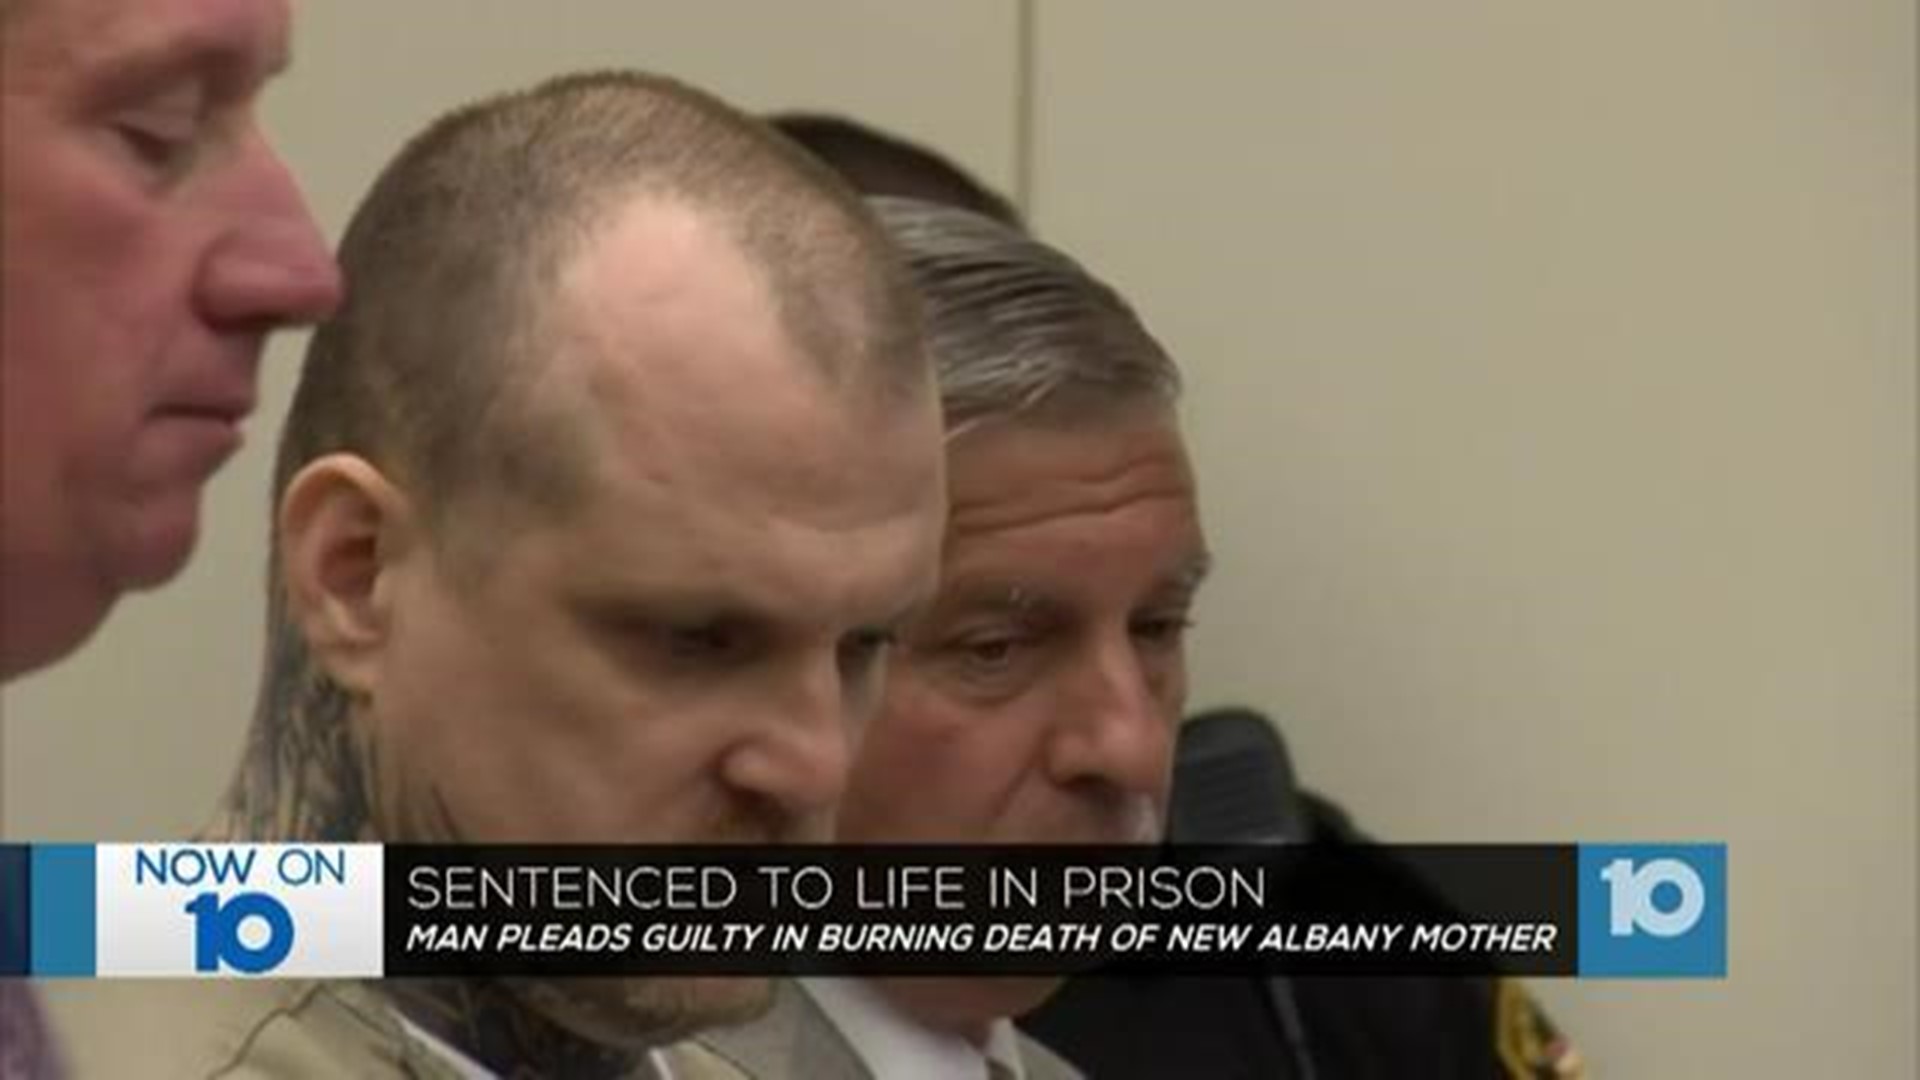 Michael Slager sentenced to life in prison for murder of Judy Malinowski